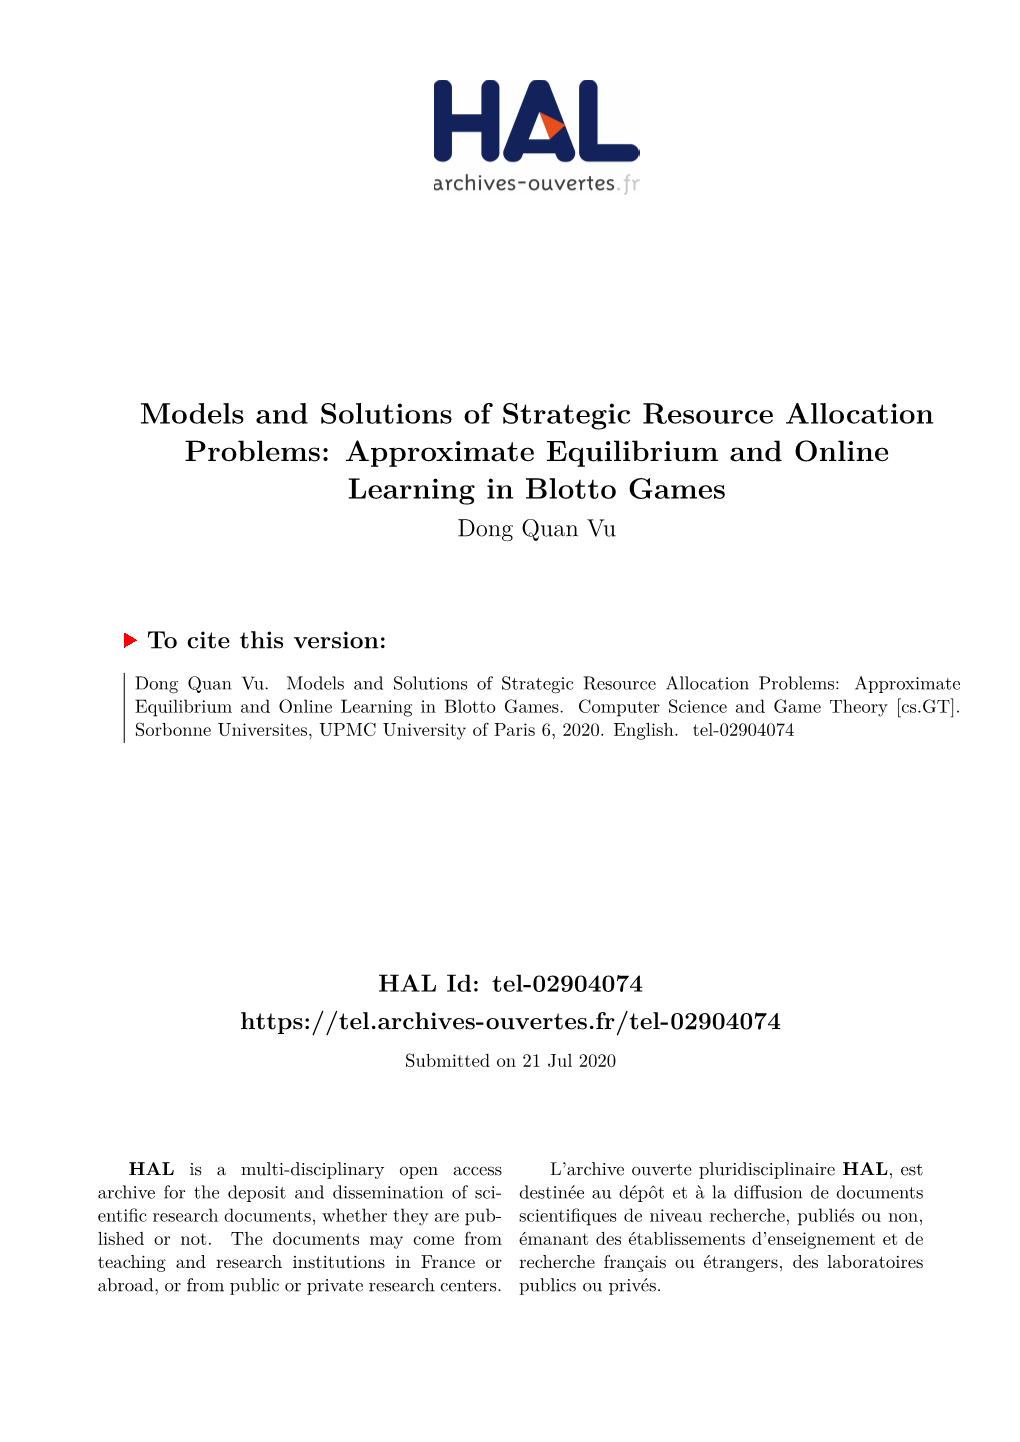 Models and Solutions of Strategic Resource Allocation Problems: Approximate Equilibrium and Online Learning in Blotto Games Dong Quan Vu